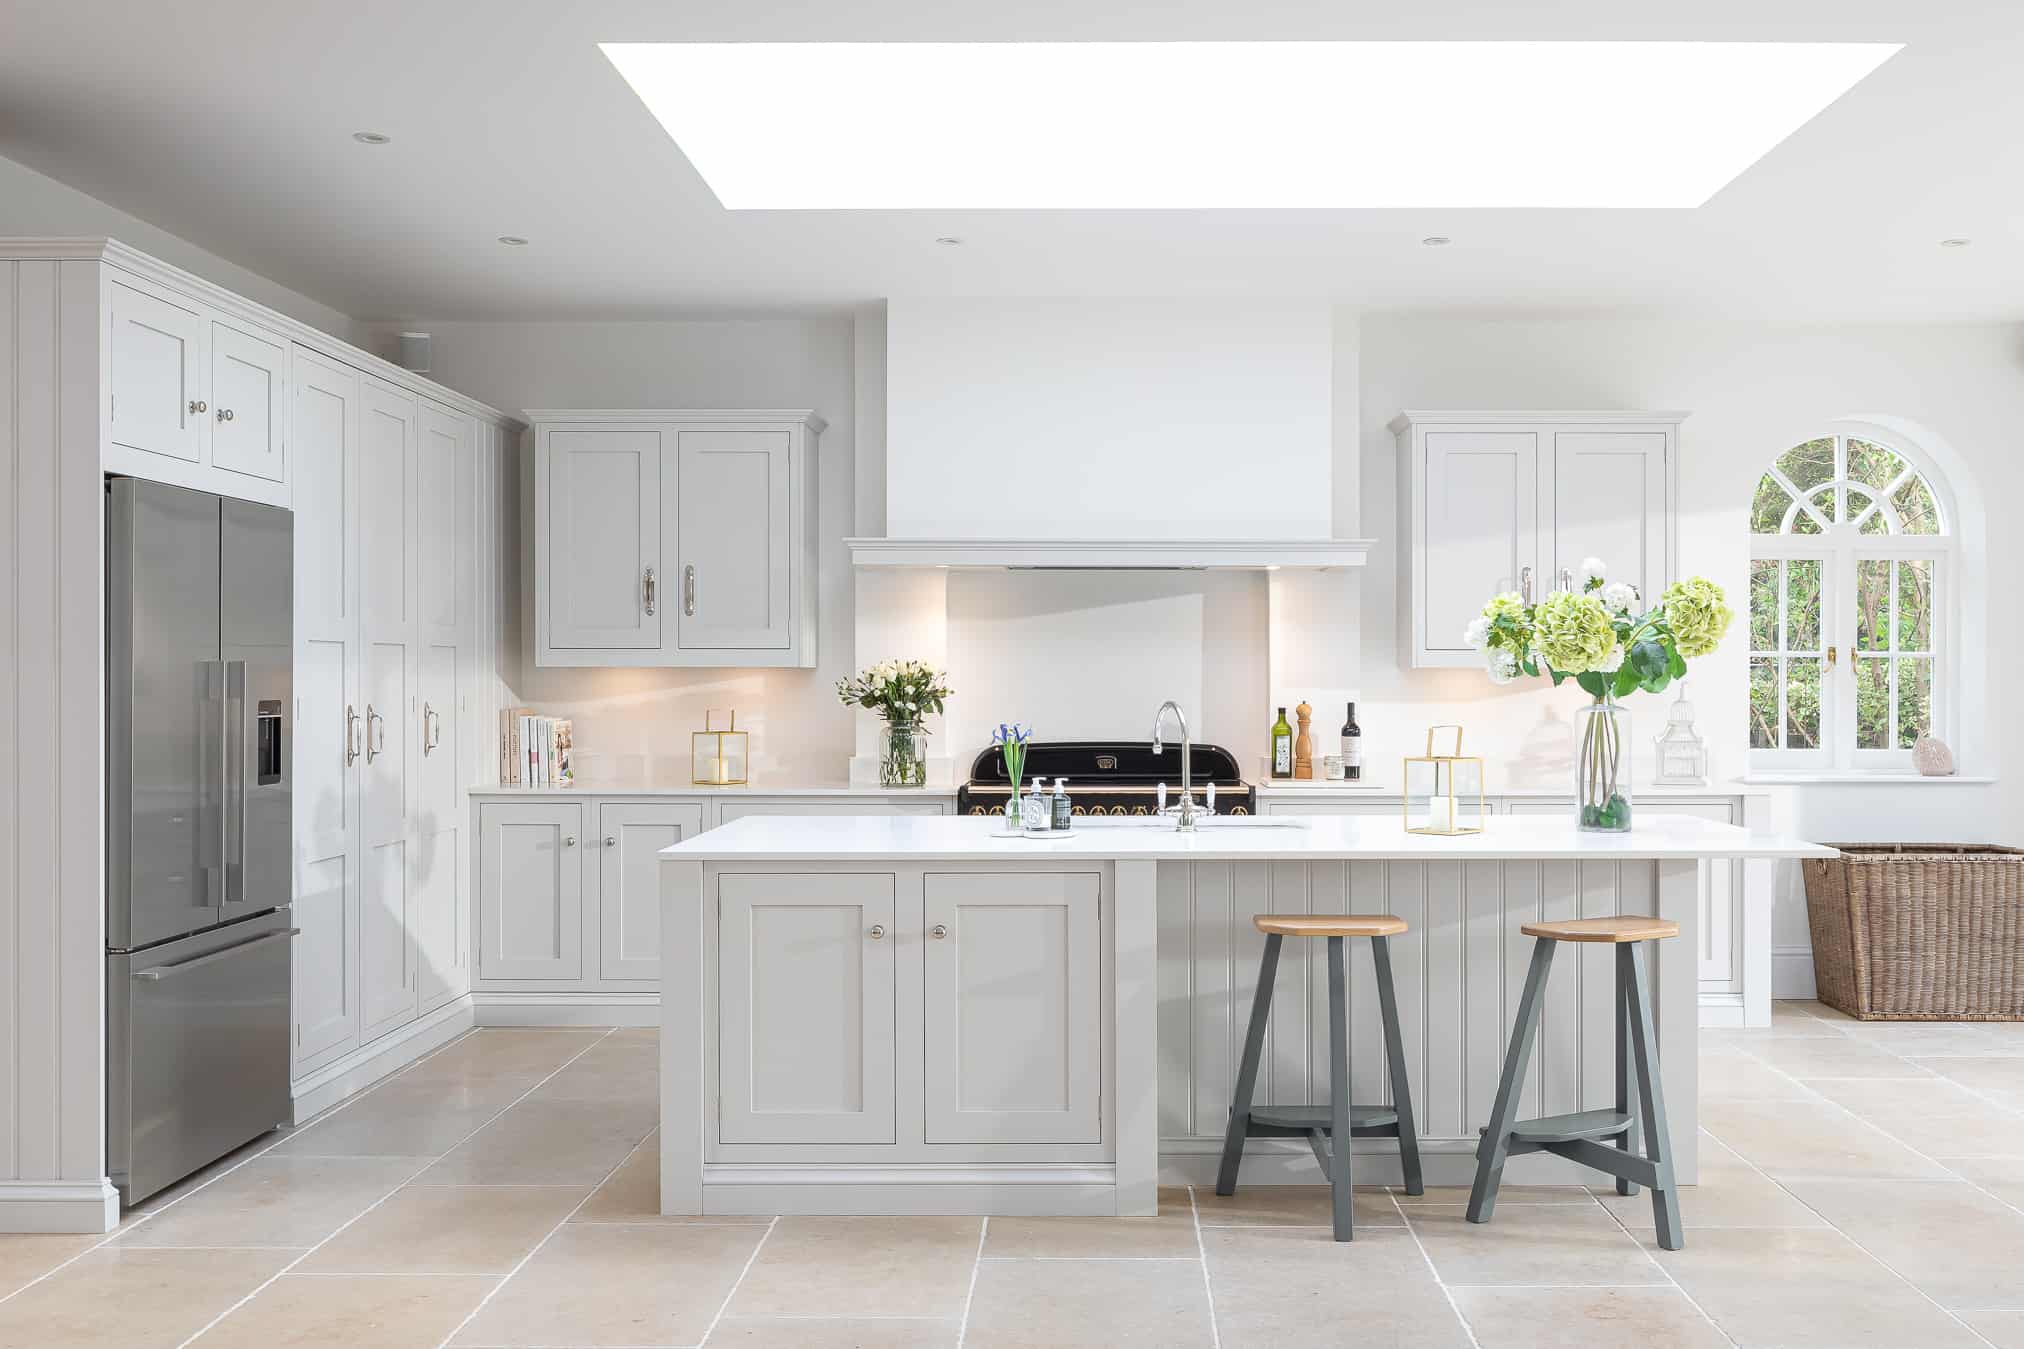 John Lewis of Hungerford luxury shaker kitchen in white with grey legged stools and white kitchen island